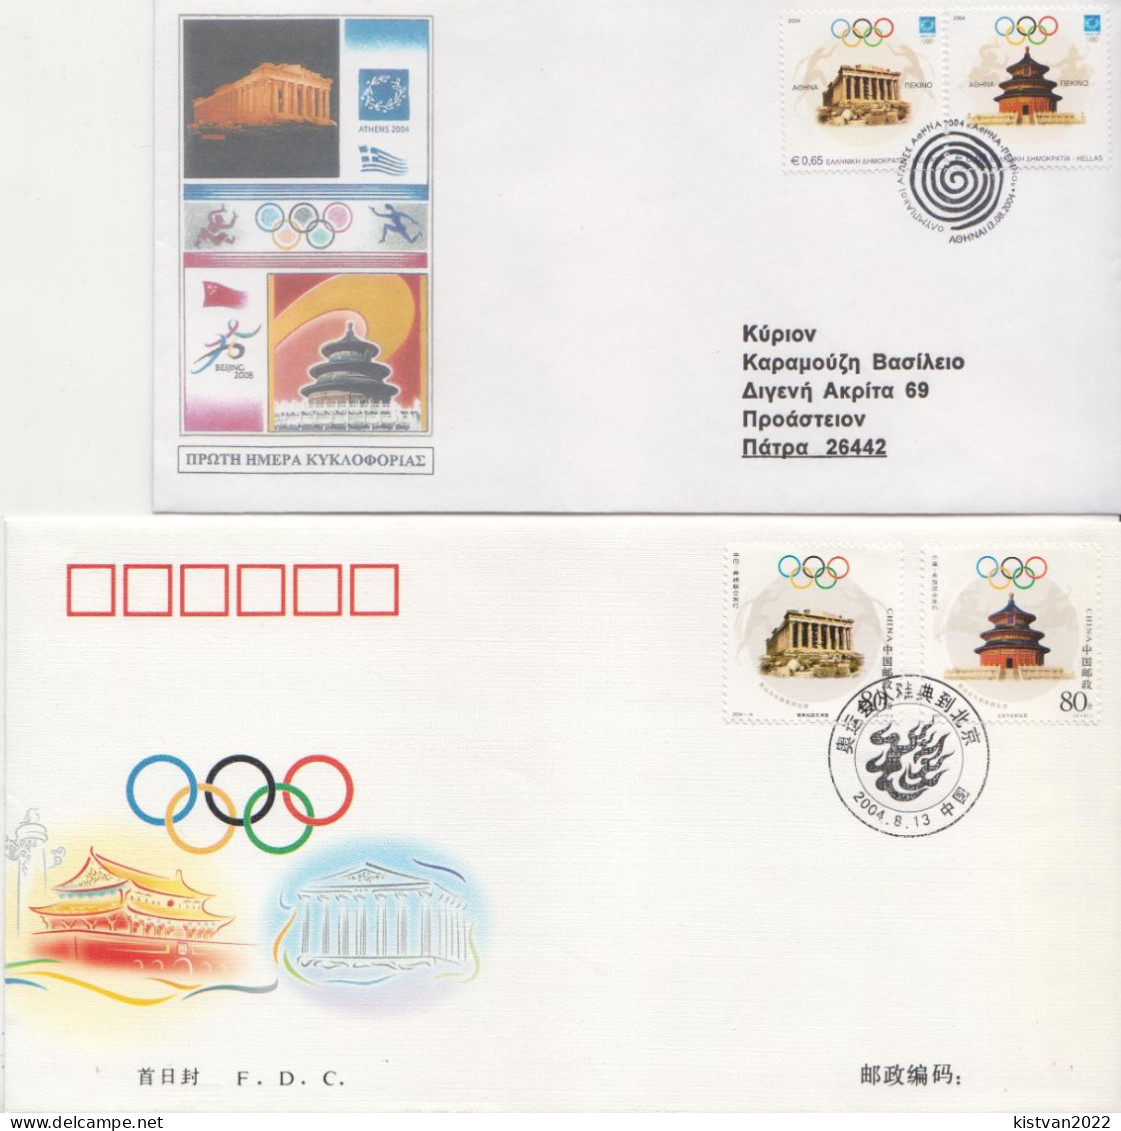 Joint Issues From Greece And China On 5 FDCs - Estate 2004: Atene